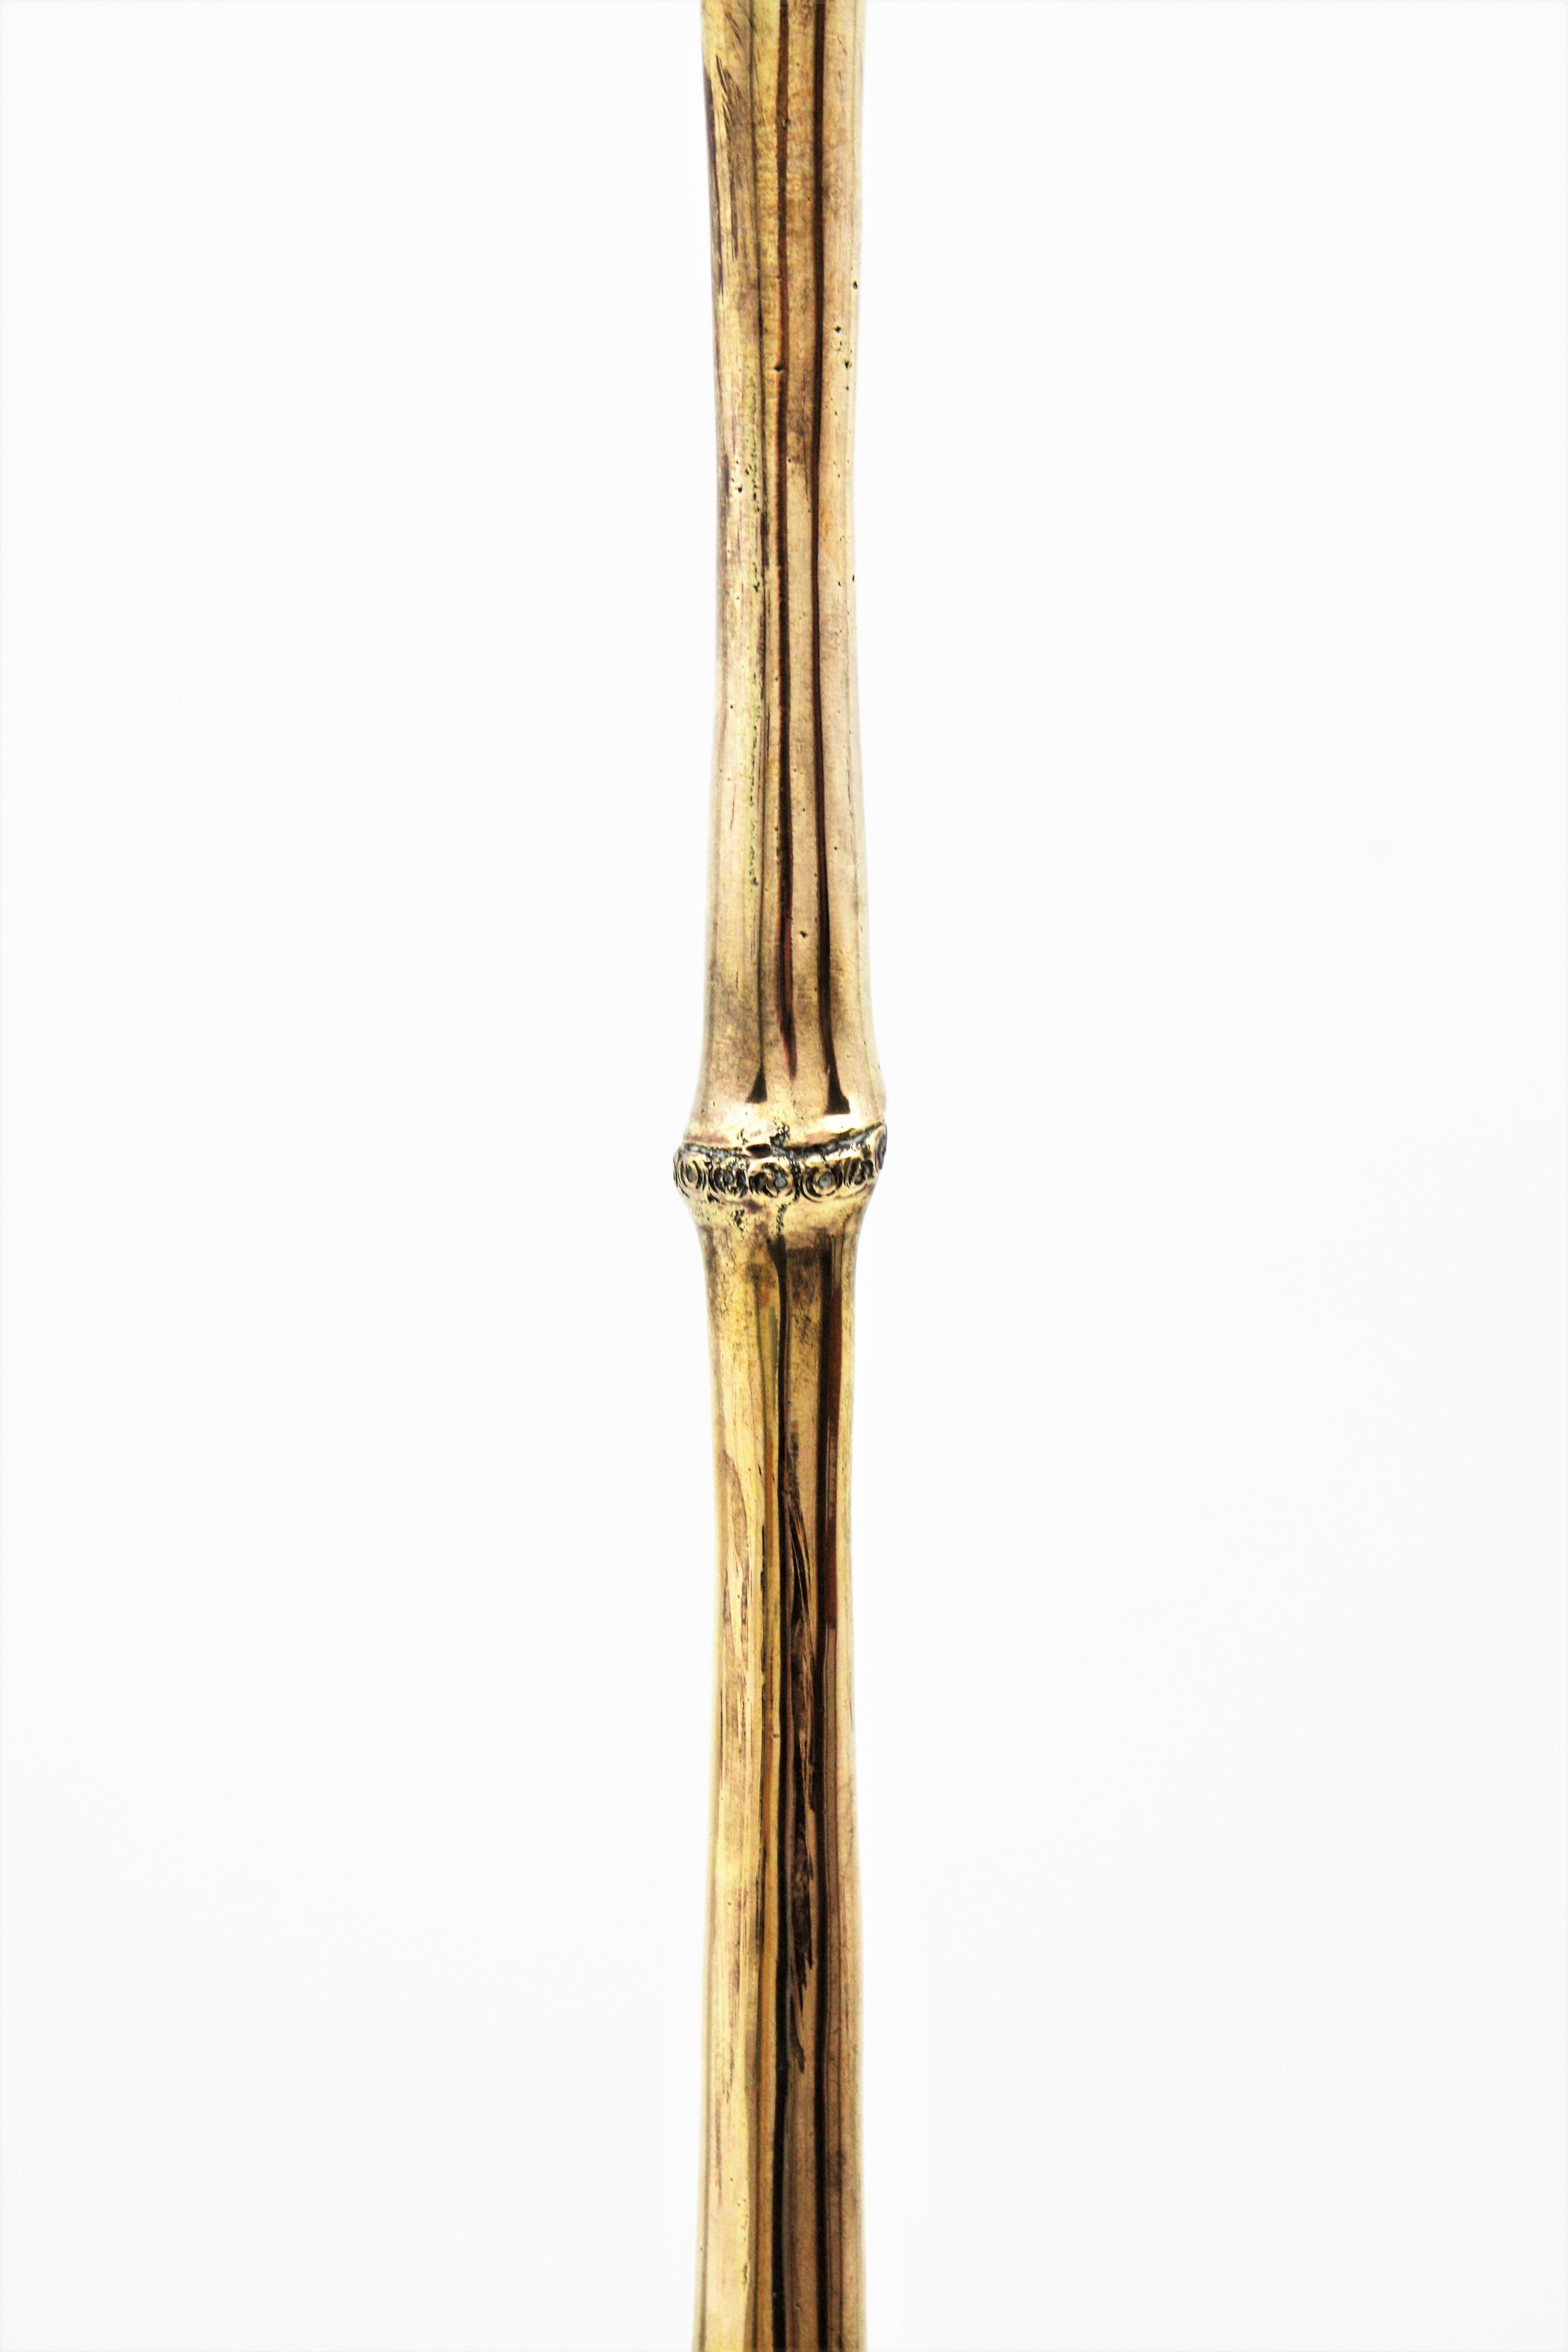 Lacquered Maison Baguès Faux Bamboo Tripod Floor Lamp in Bronze,  France, 1950s